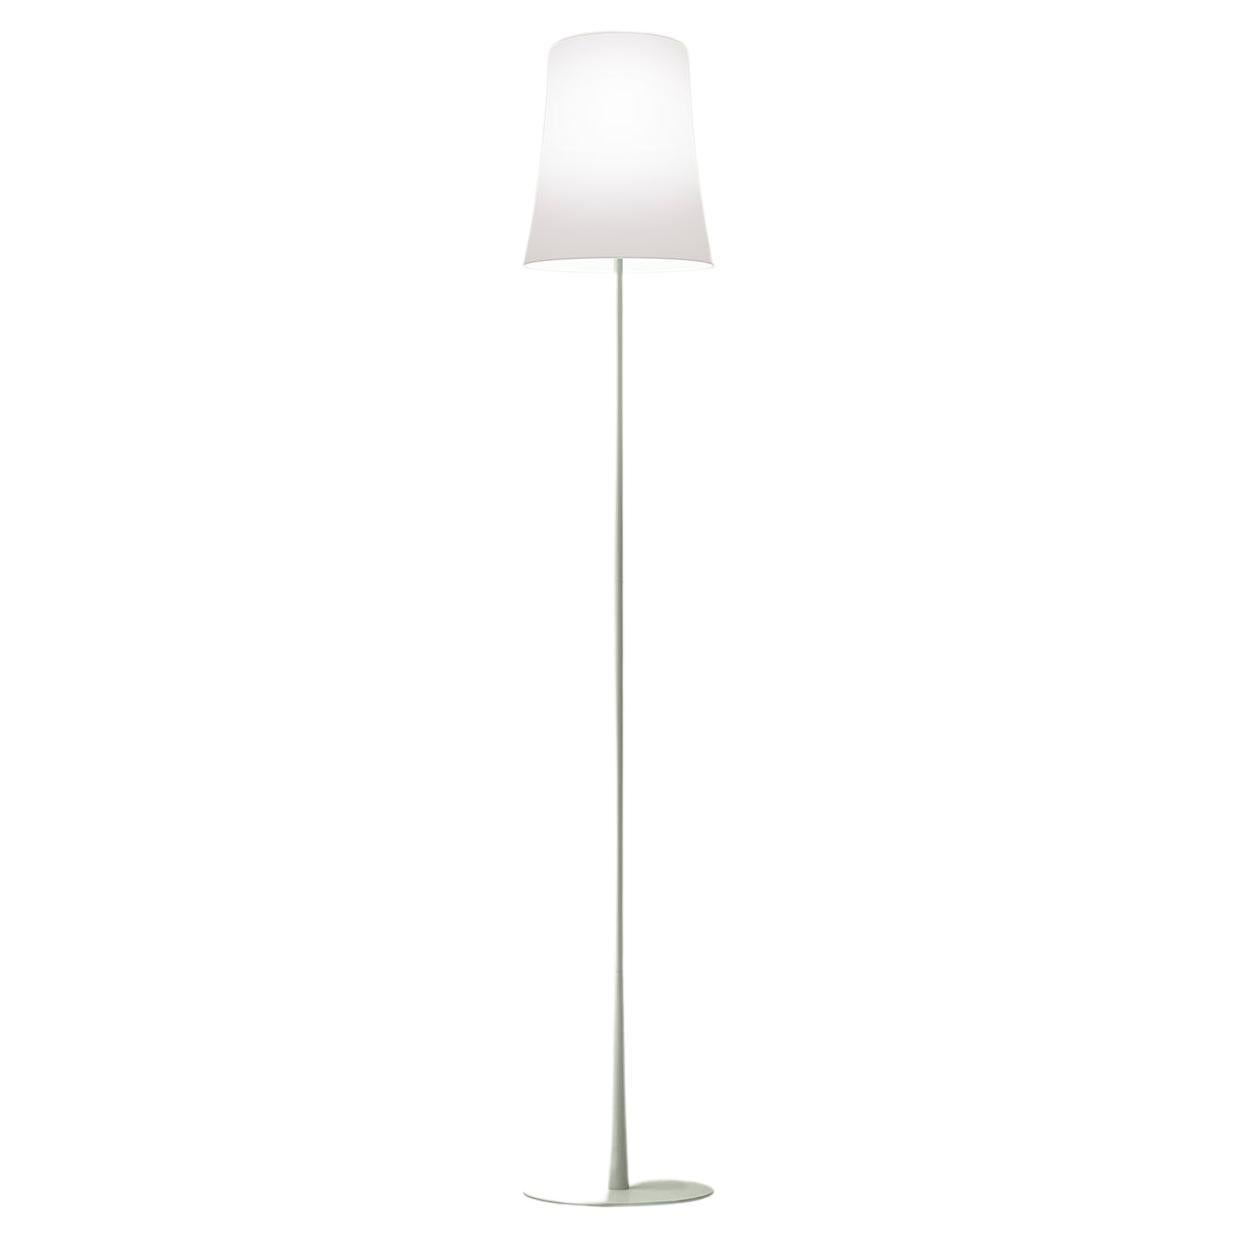 Foscarini Birdie Easy Floor Lamp in Sage Green by Ludovica & Roberto Palomba For Sale